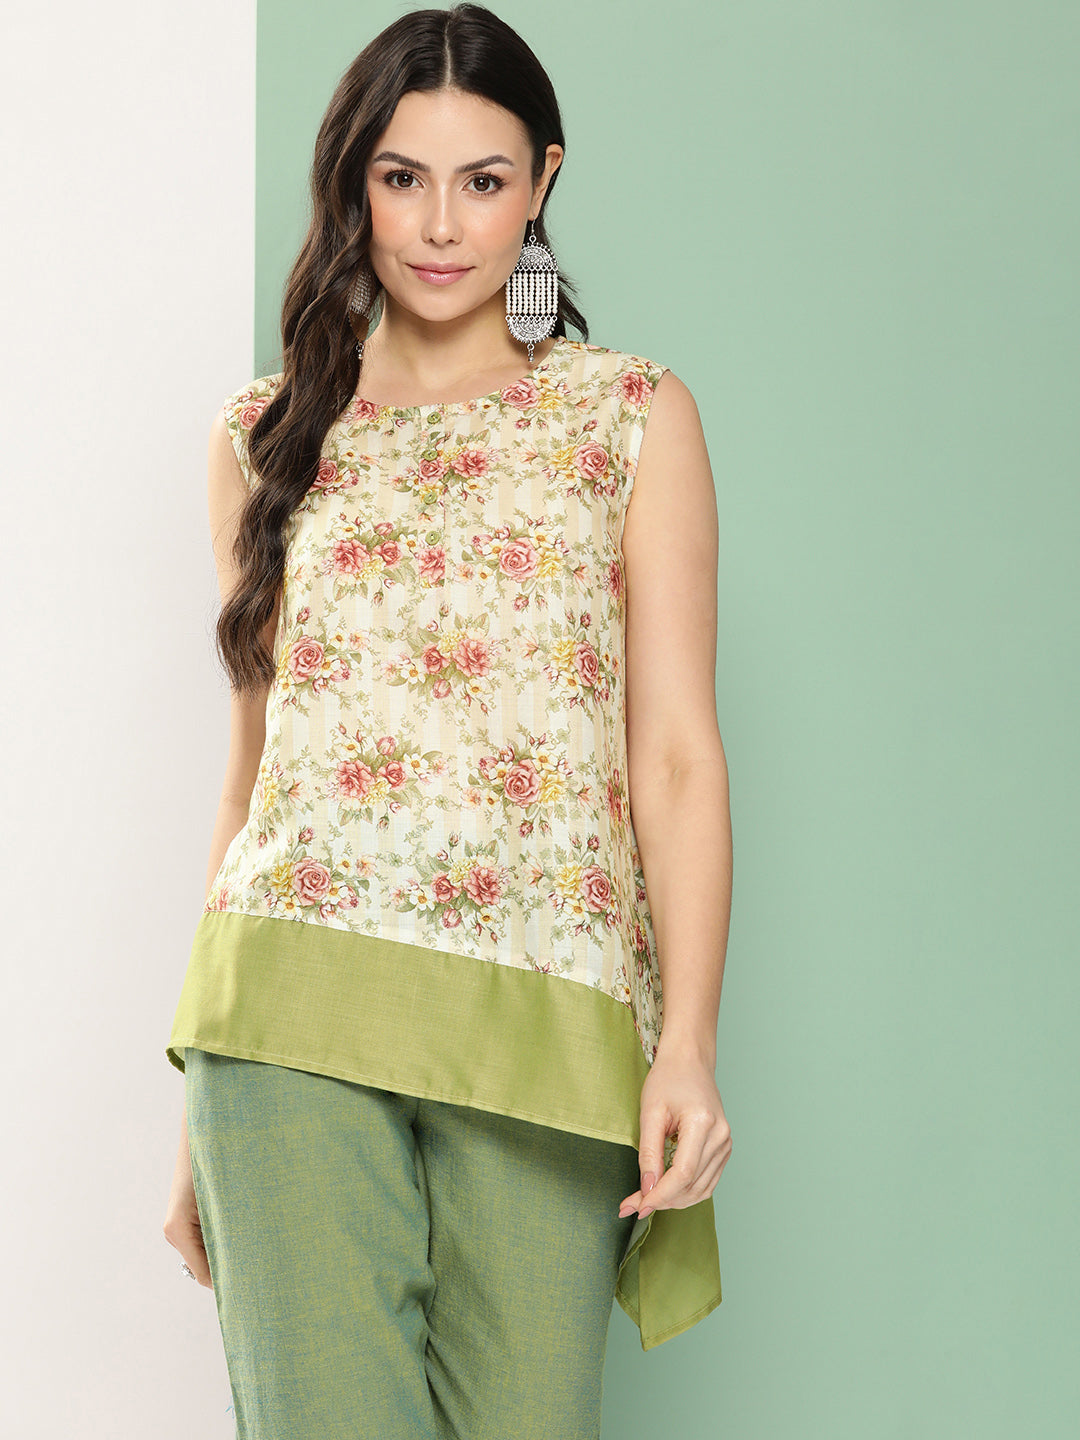 Bhama Couture Beige Flowal Prined Asymmetrical Top